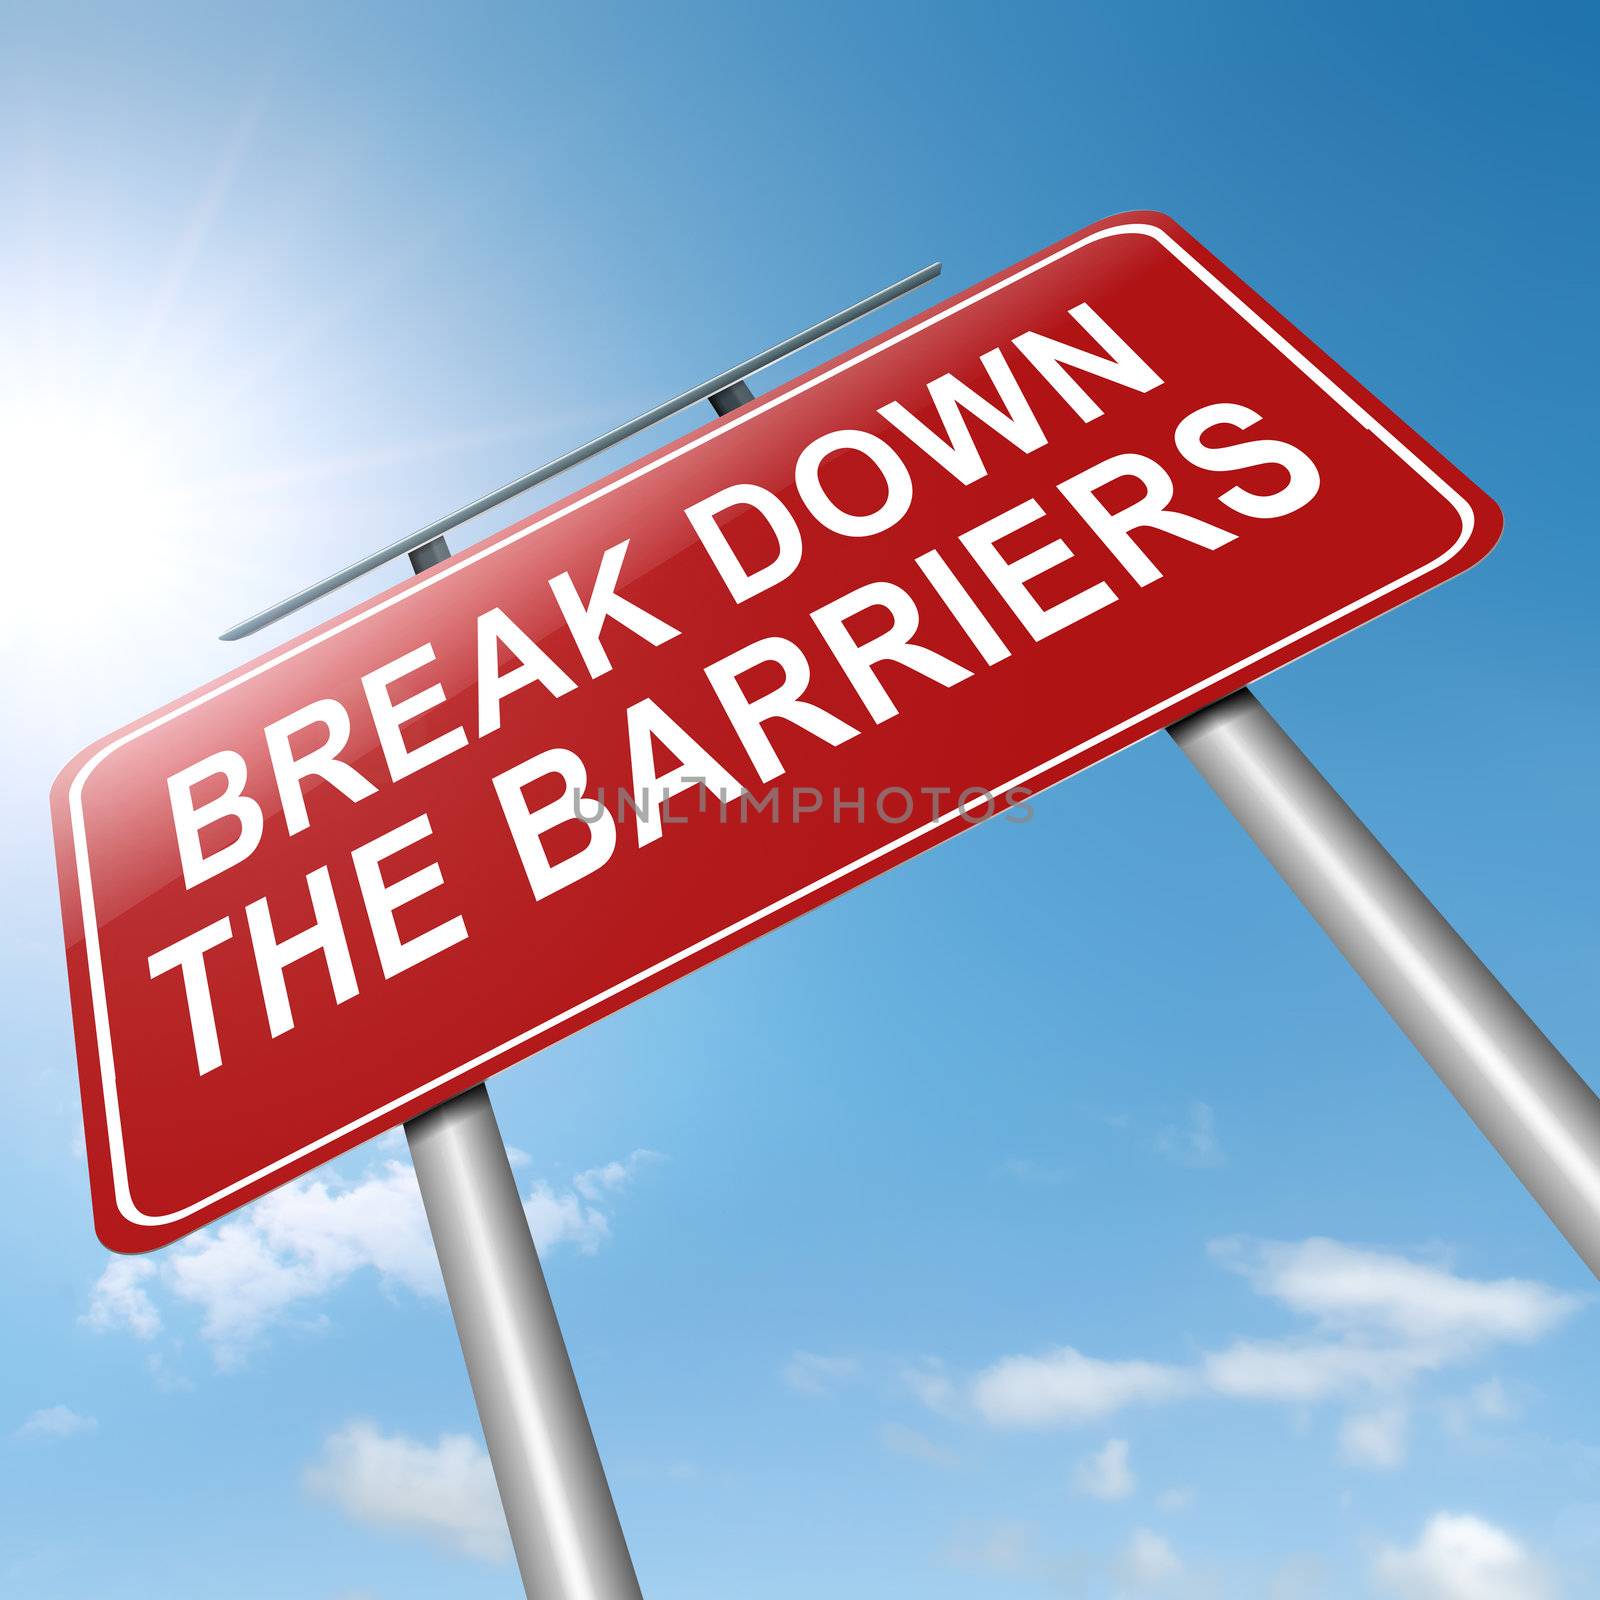 Illustration depicting a roadsign with a break down the barriers concept. Sky background.